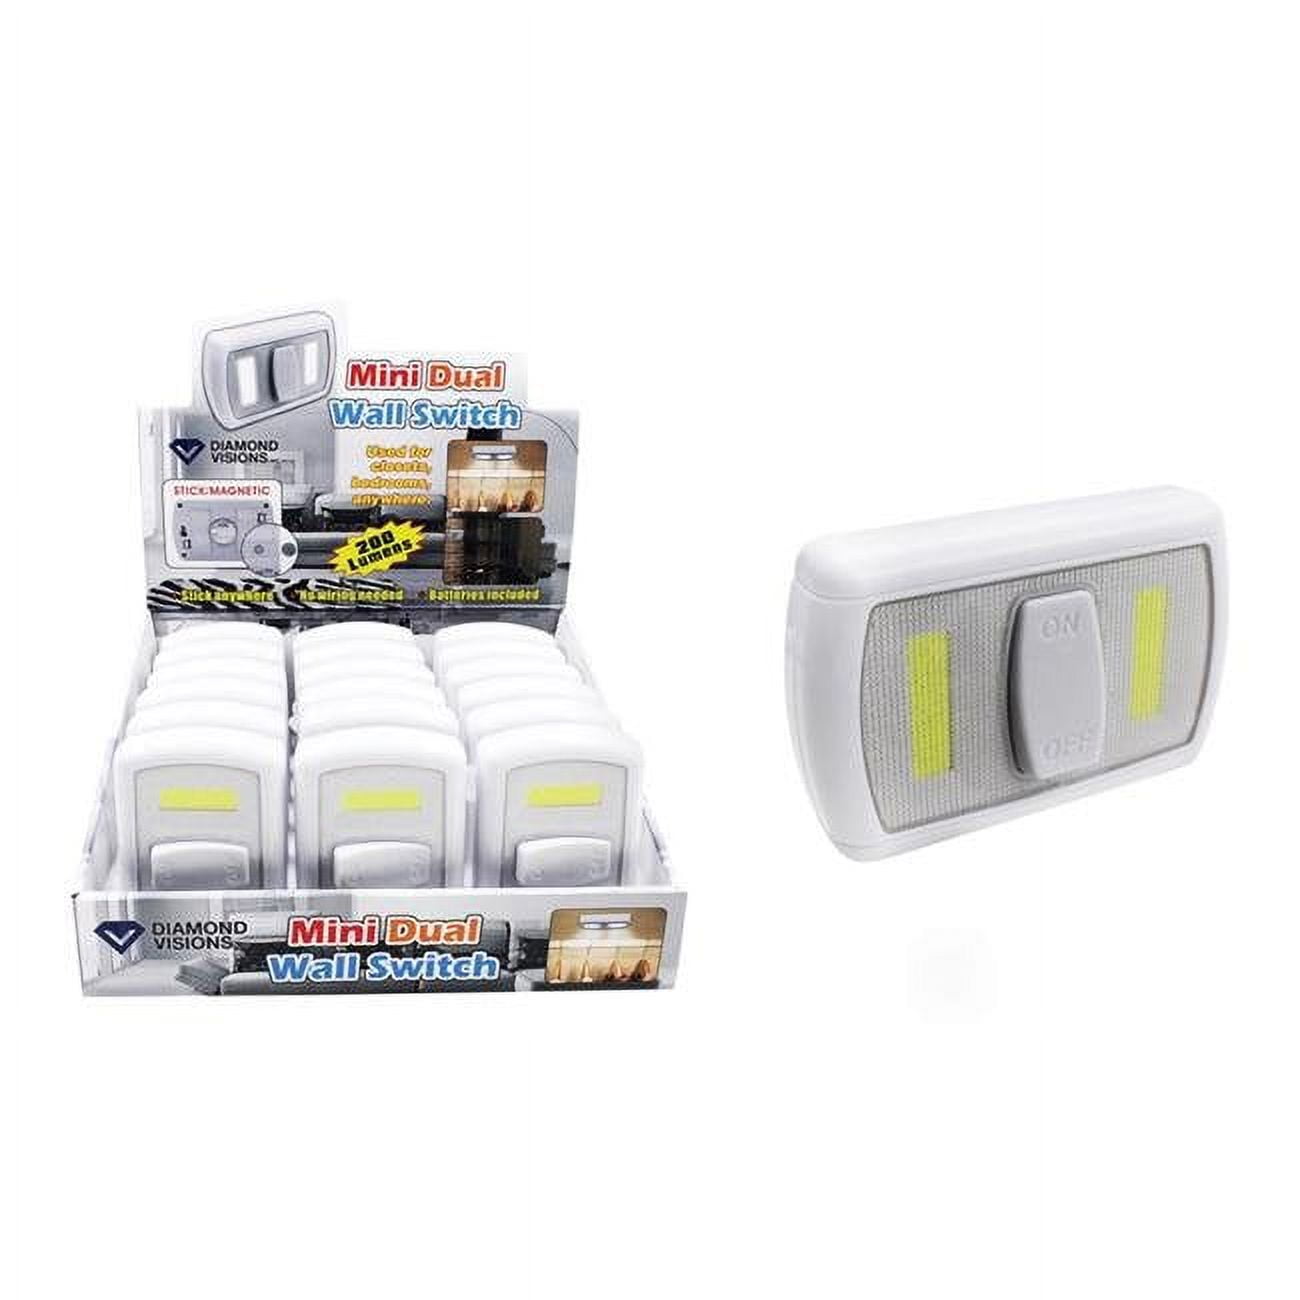 9017039 Manual Battery Powered Mini Cob Led Night Light With Switch - Case Of 18